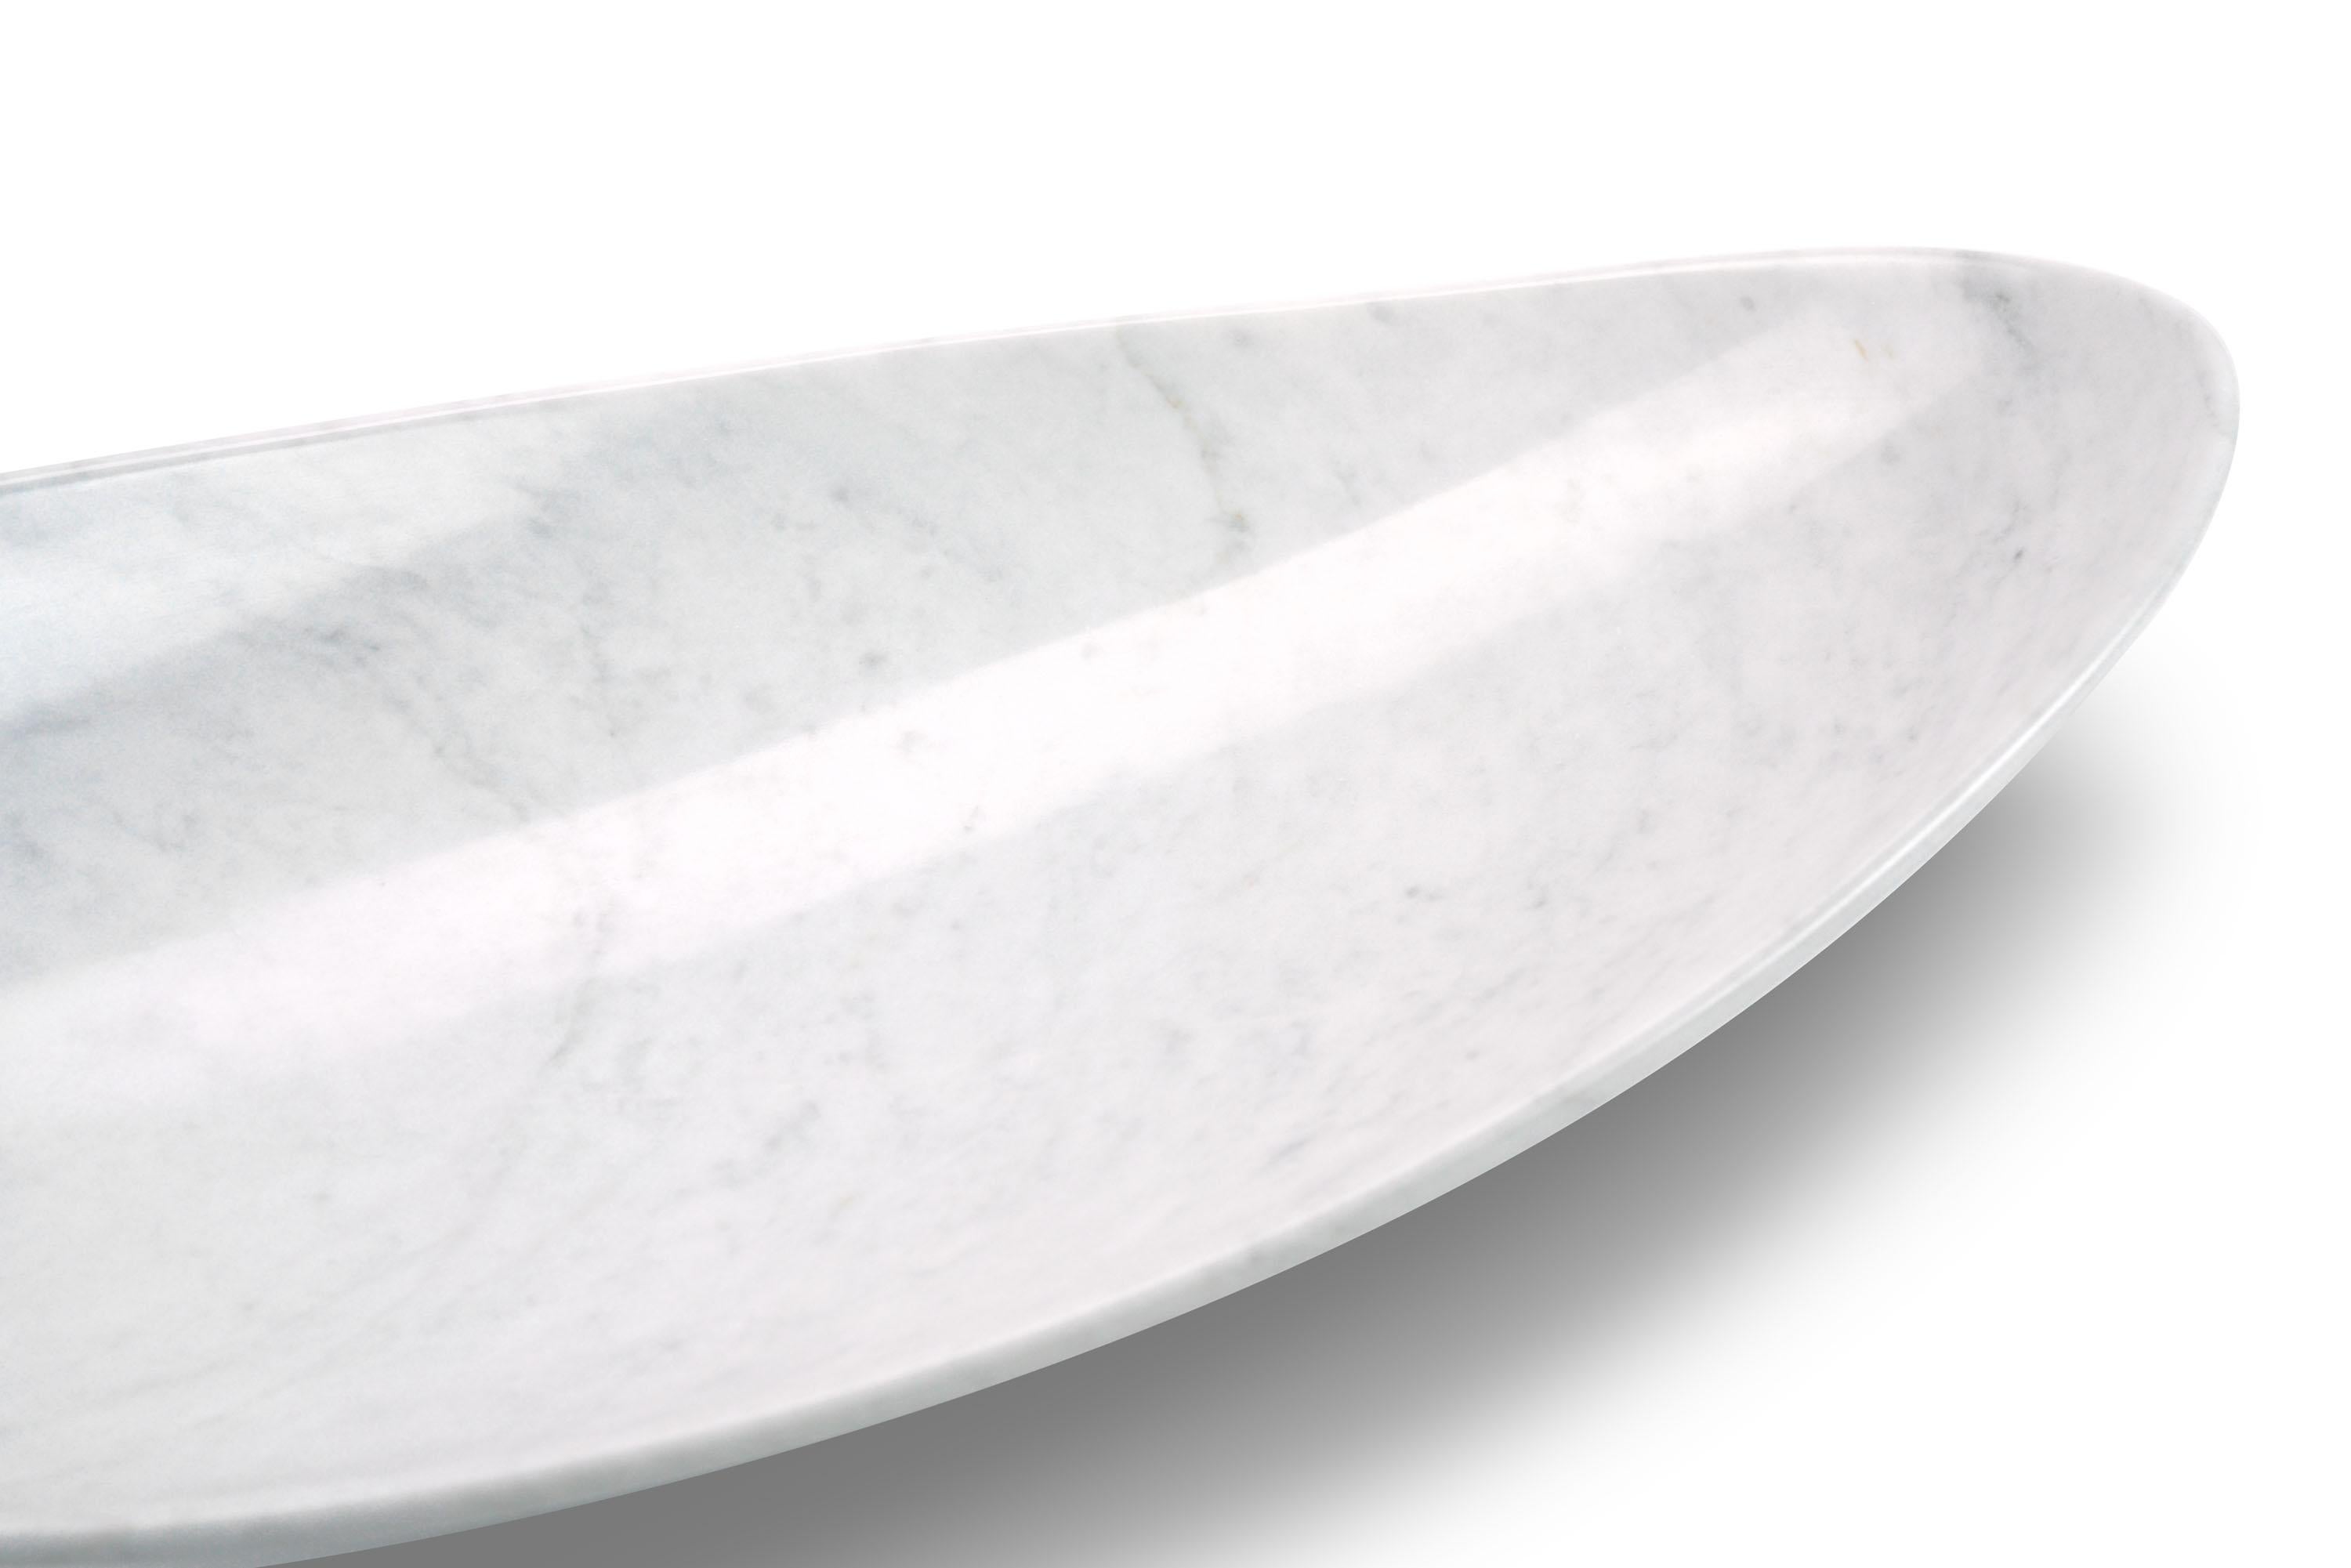 Bowl sculpted by hand from a solid block of white Carrara marble. Polish finishing. 

Dimensions: Big L 56 x  W 27 x  H 12 cm. Medium L 45 x W 22 x H 10 cm.  Small L 35 x  W 17 x H 8 cm.
Available in different marbles, onyx and quartzite.

100% Hand